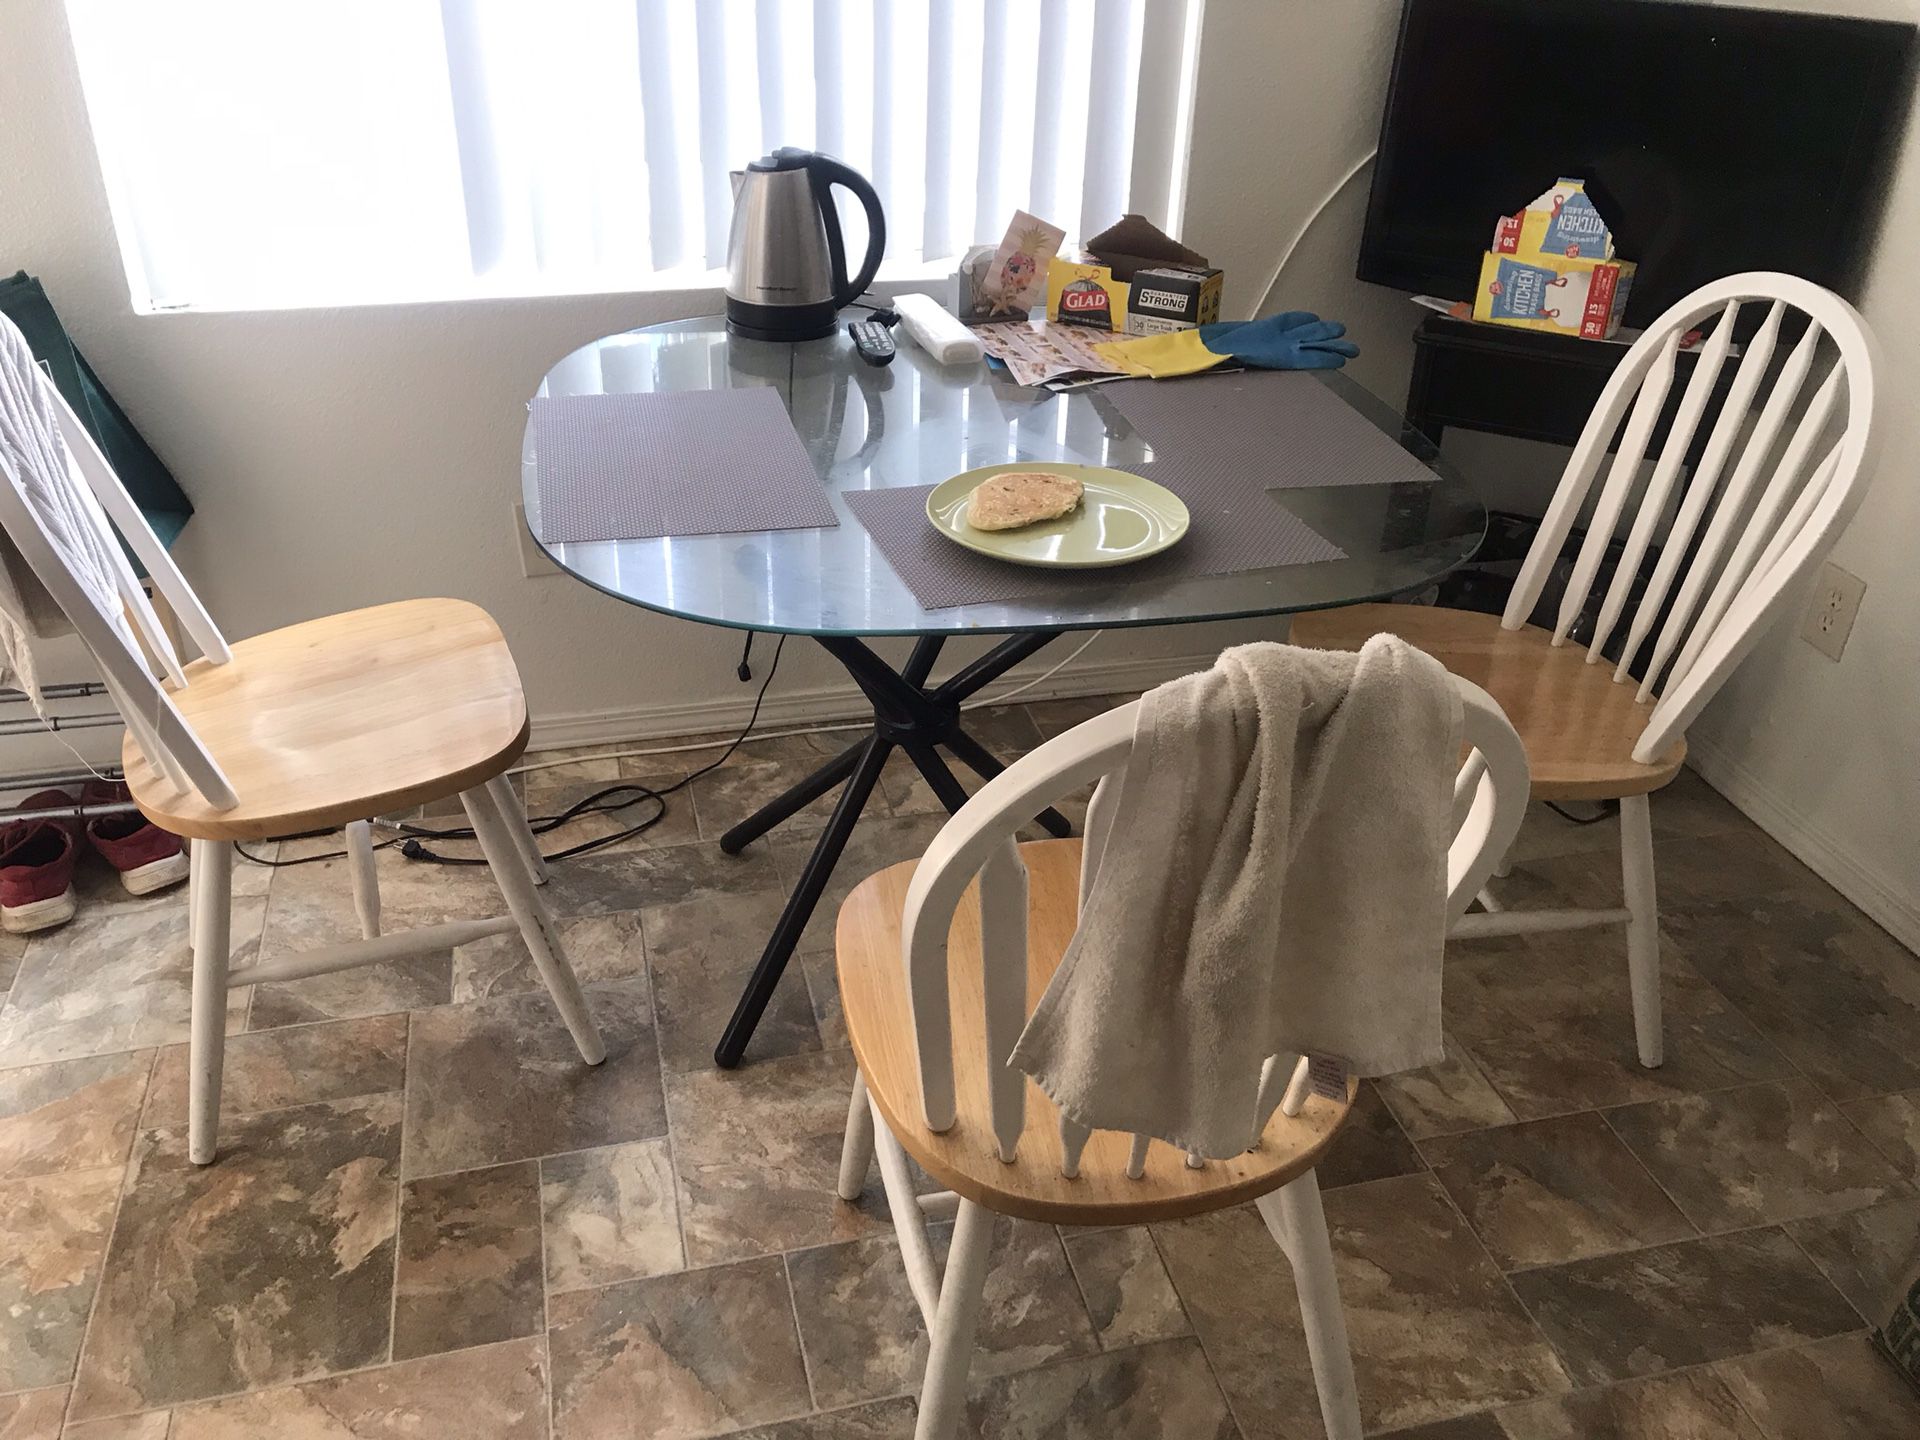 Kitchen glass table with 3 wood chairs